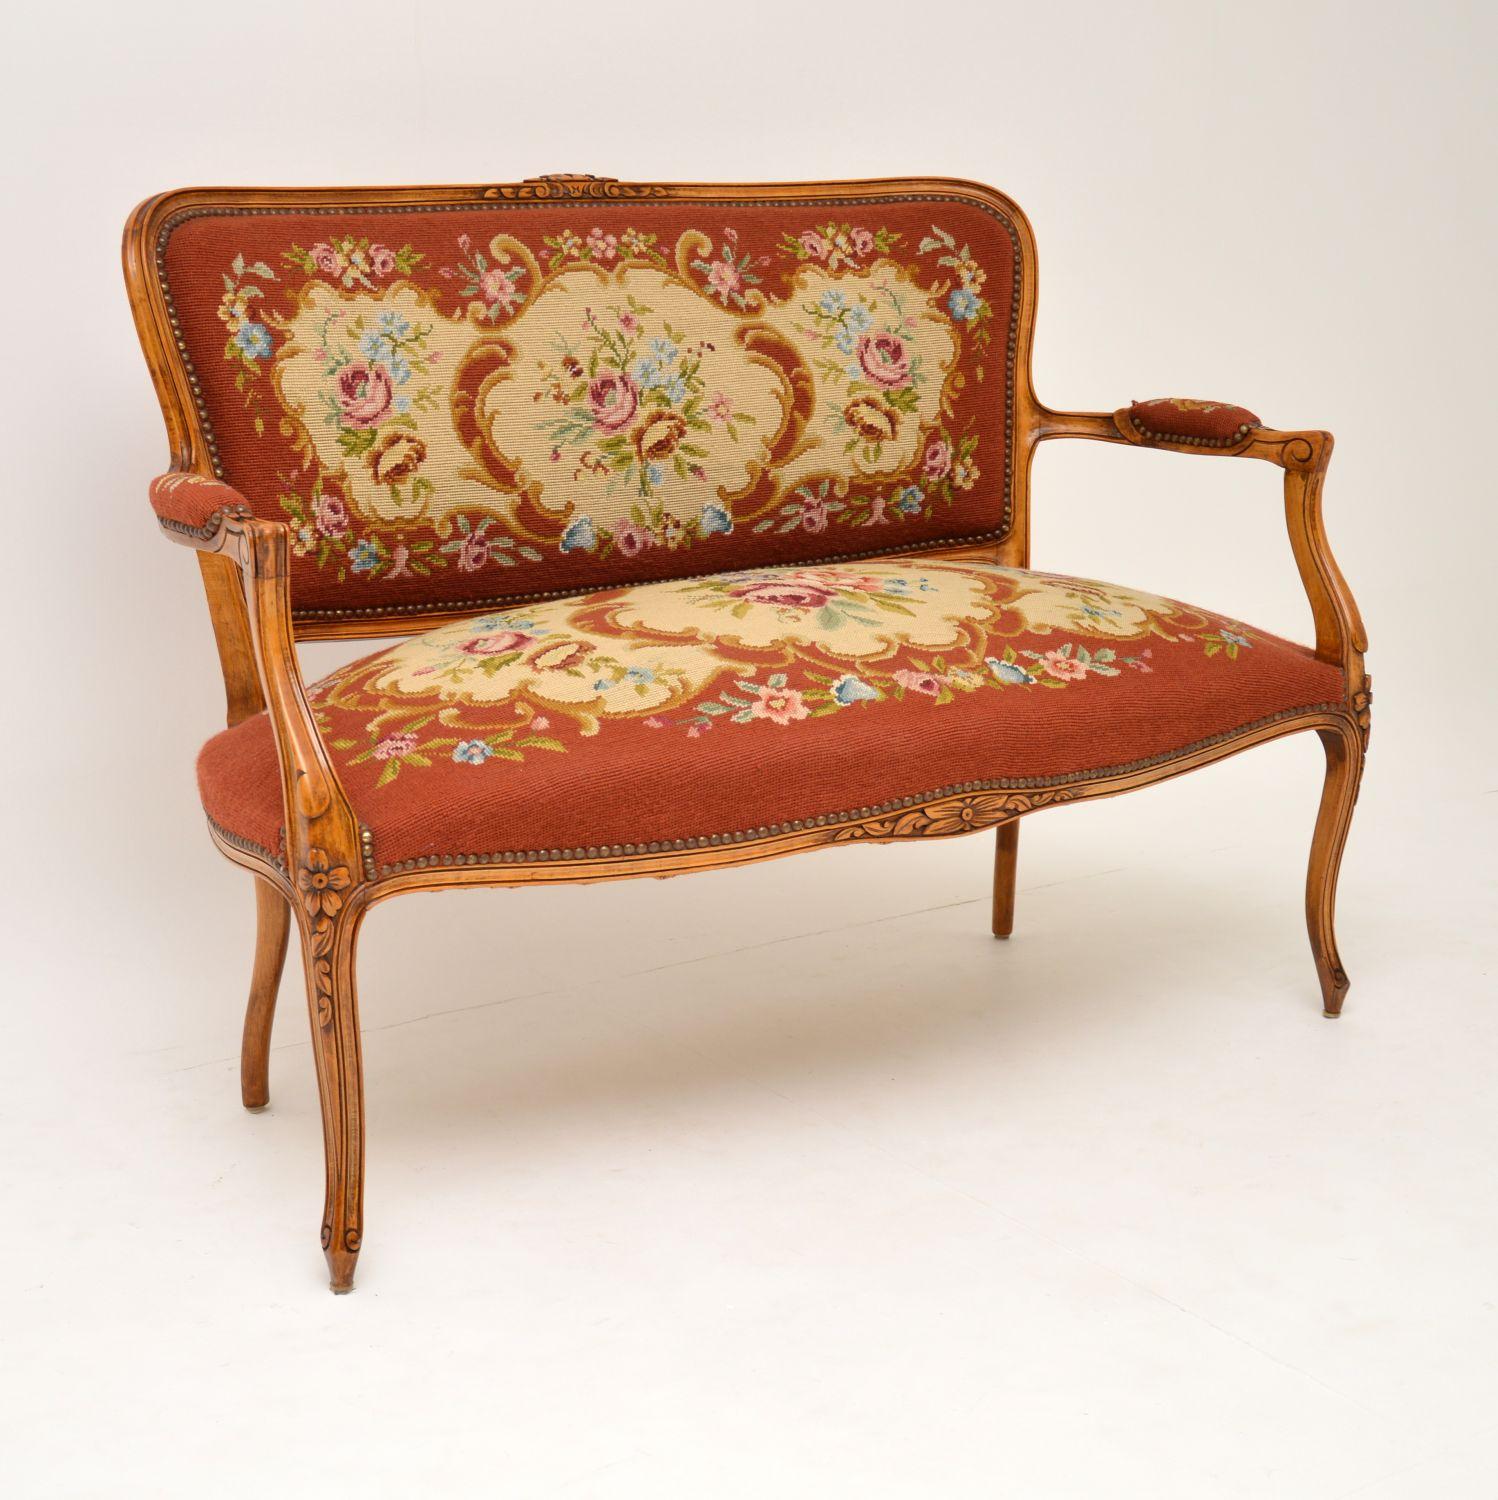 This antique French sofa is in excellent original condition and dates from circa 1890-1910 period.

What’s nice, is that it still has the original needlepoint fabric which is in very good condition. It has a sturdy solid walnut or beech frame with